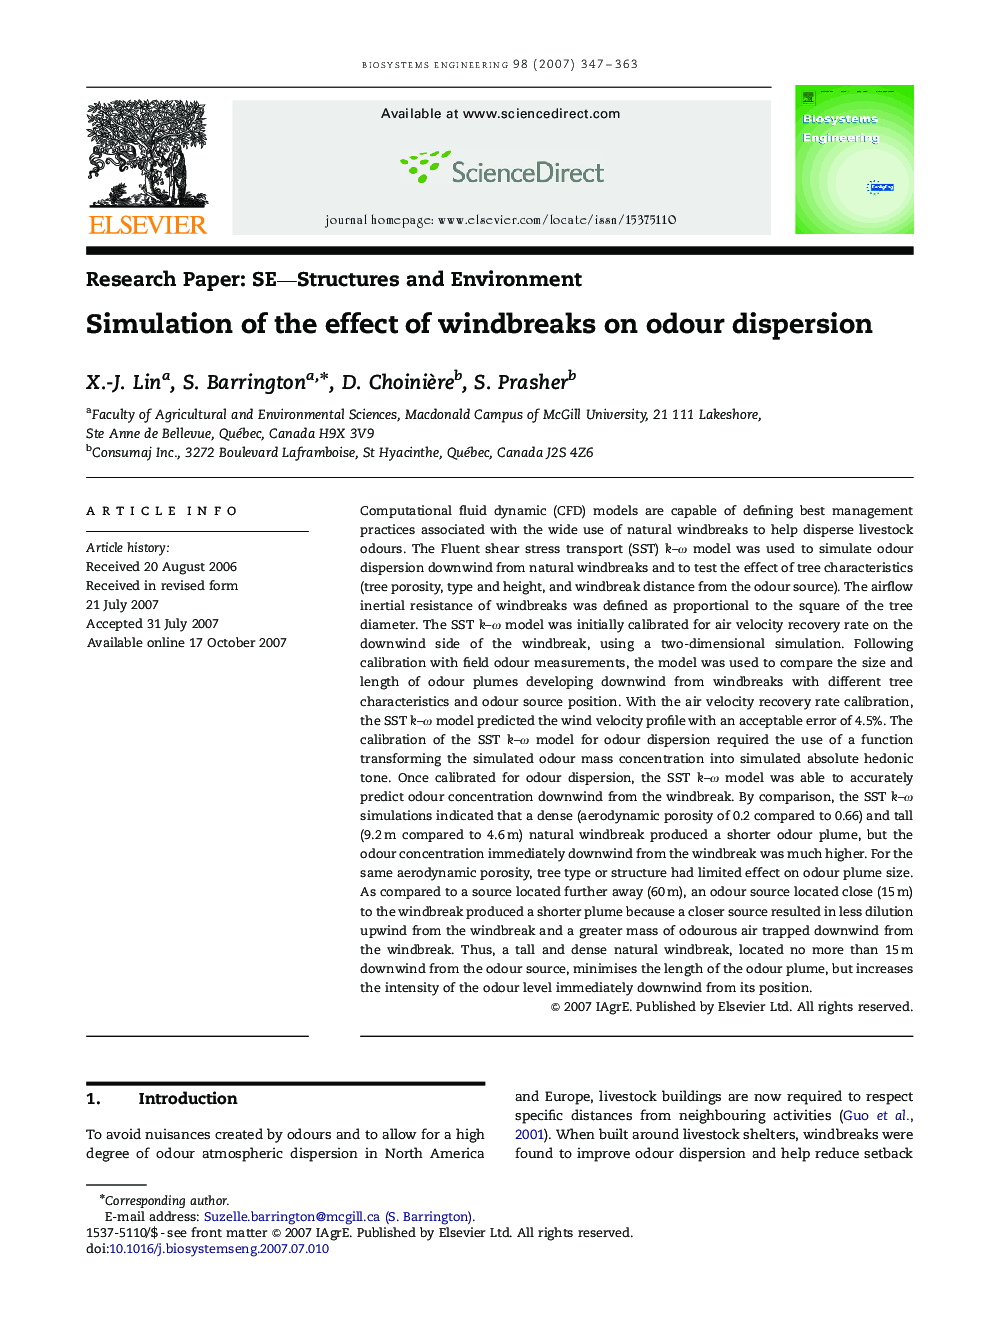 Simulation of the effect of windbreaks on odour dispersion